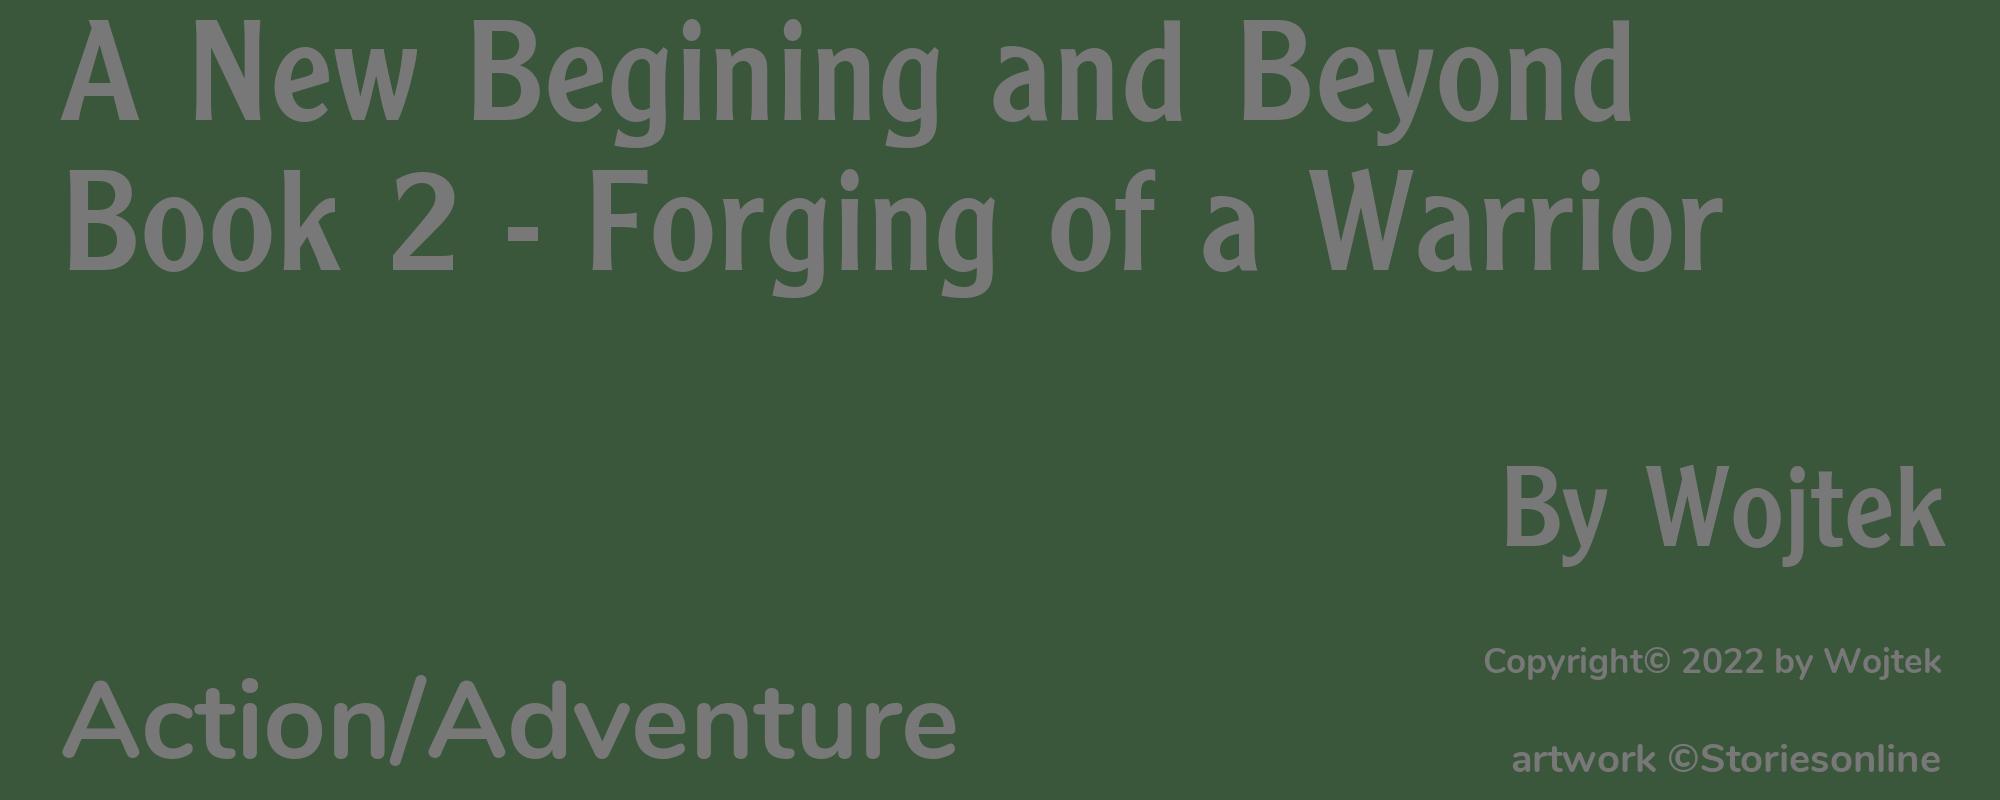 A New Begining and Beyond Book 2 - Forging of a Warrior - Cover